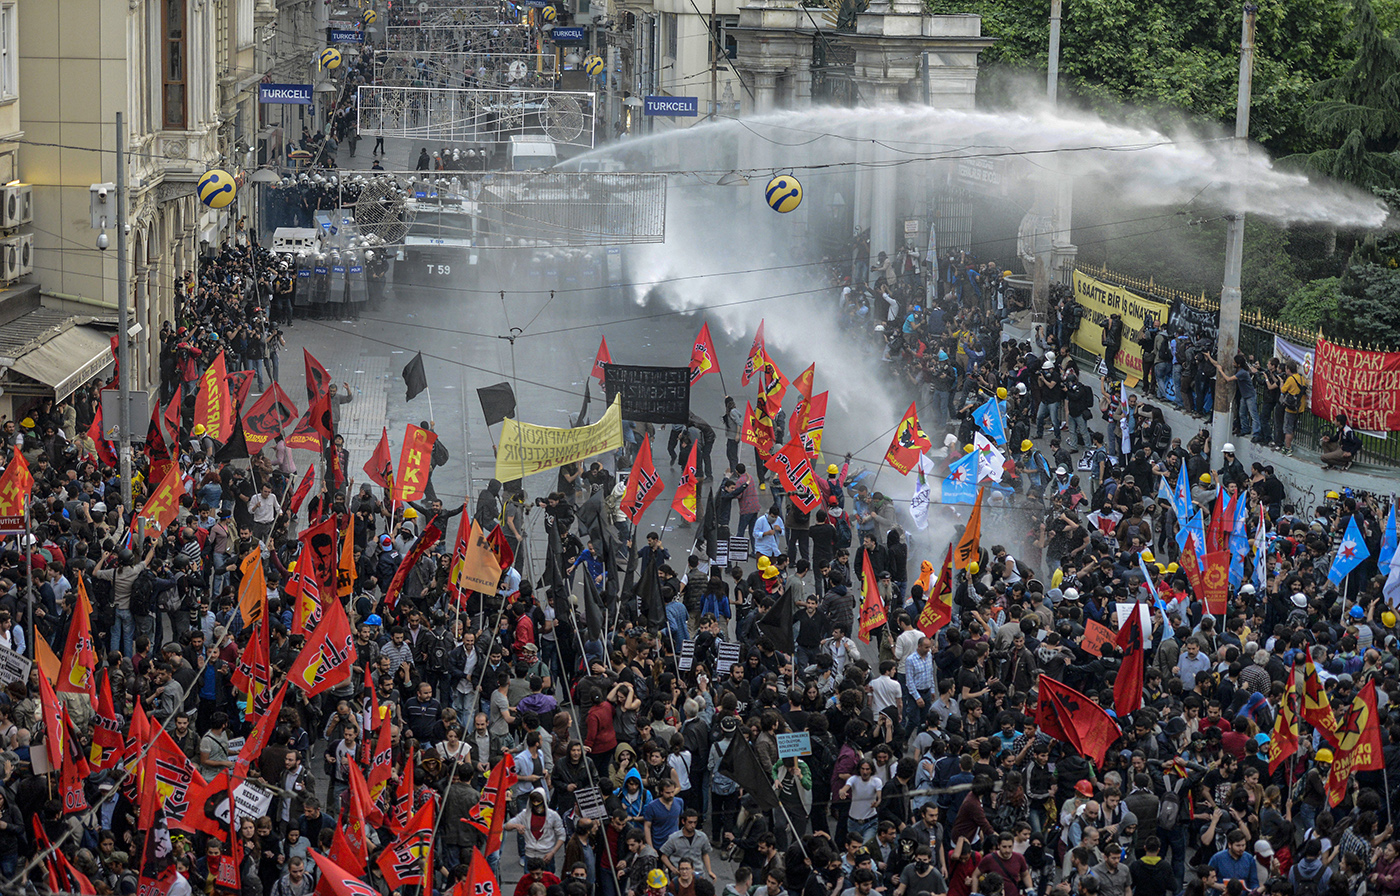 Turkish riot police use water cannon to disperse protestors as they clash during a demonstration for the victims of the Soma mine explosion, in Istanbul, Turkey, 14 May 2014.